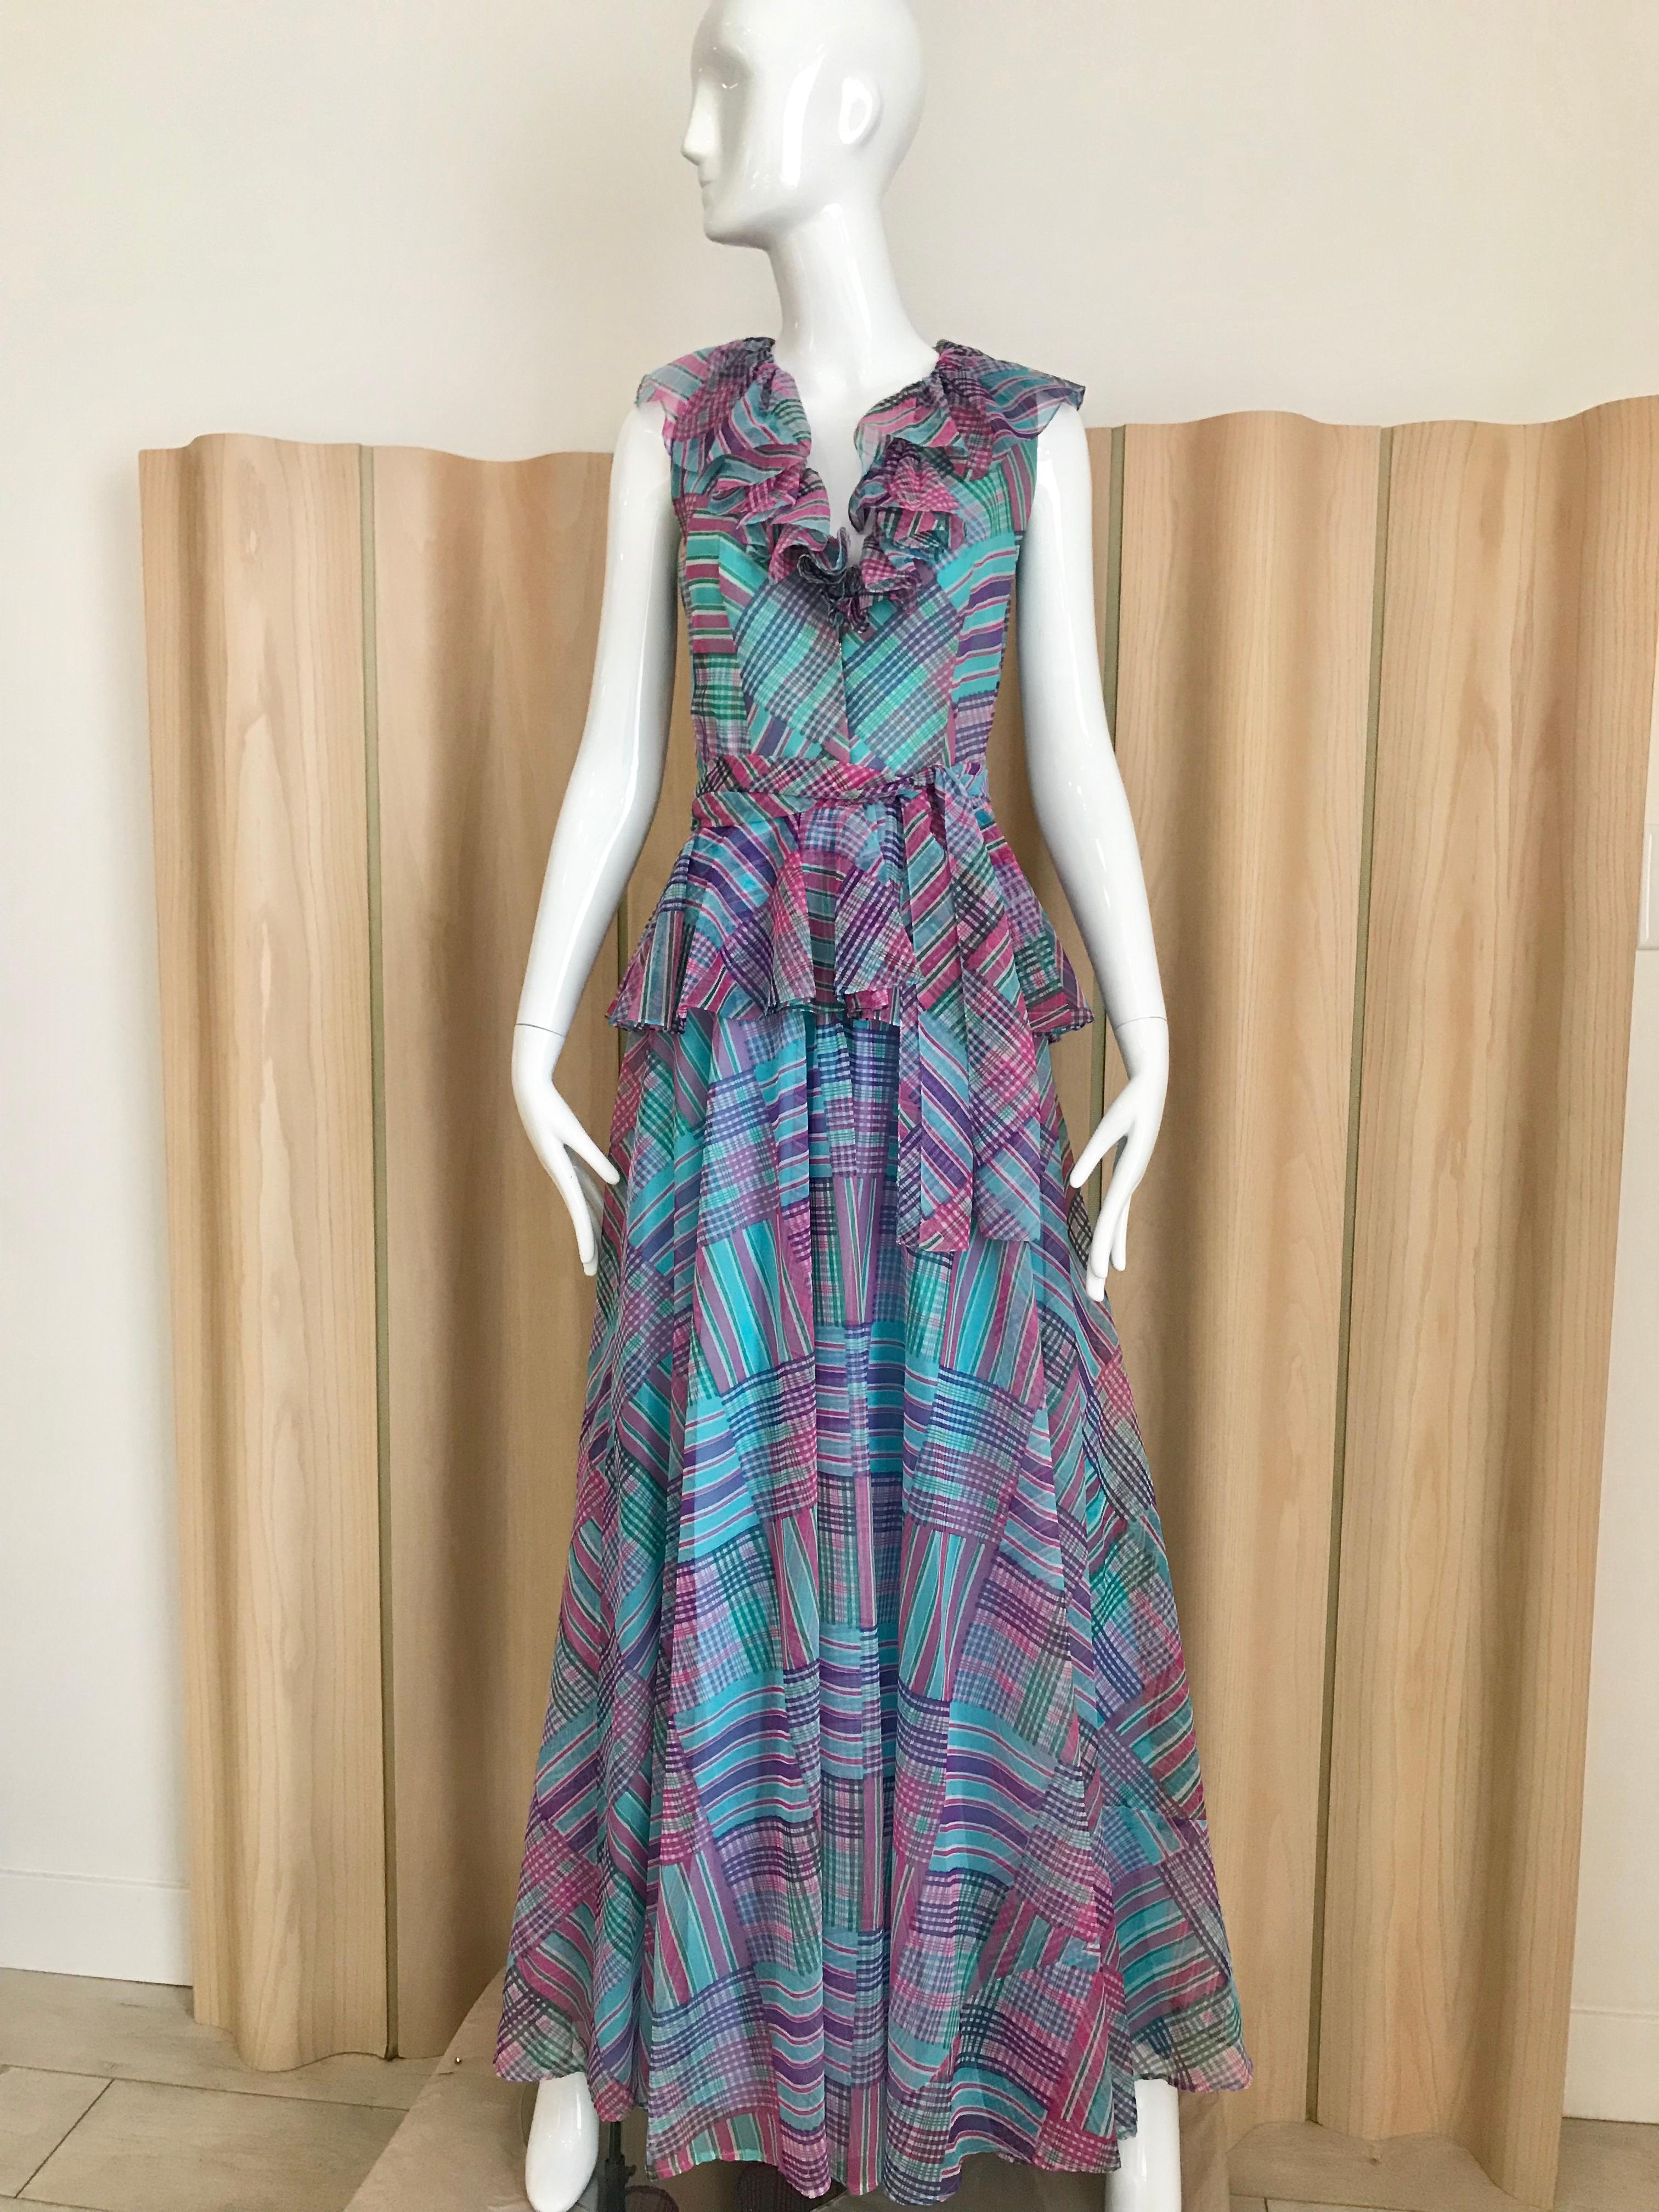 Vintage 1970s multi color ( pink, blue, green plaid ruffle V neck sleeves maxi dress.
Size: Medium
Bust: 38 inches / Waist: 28 inches/ Dress length: 60 inches